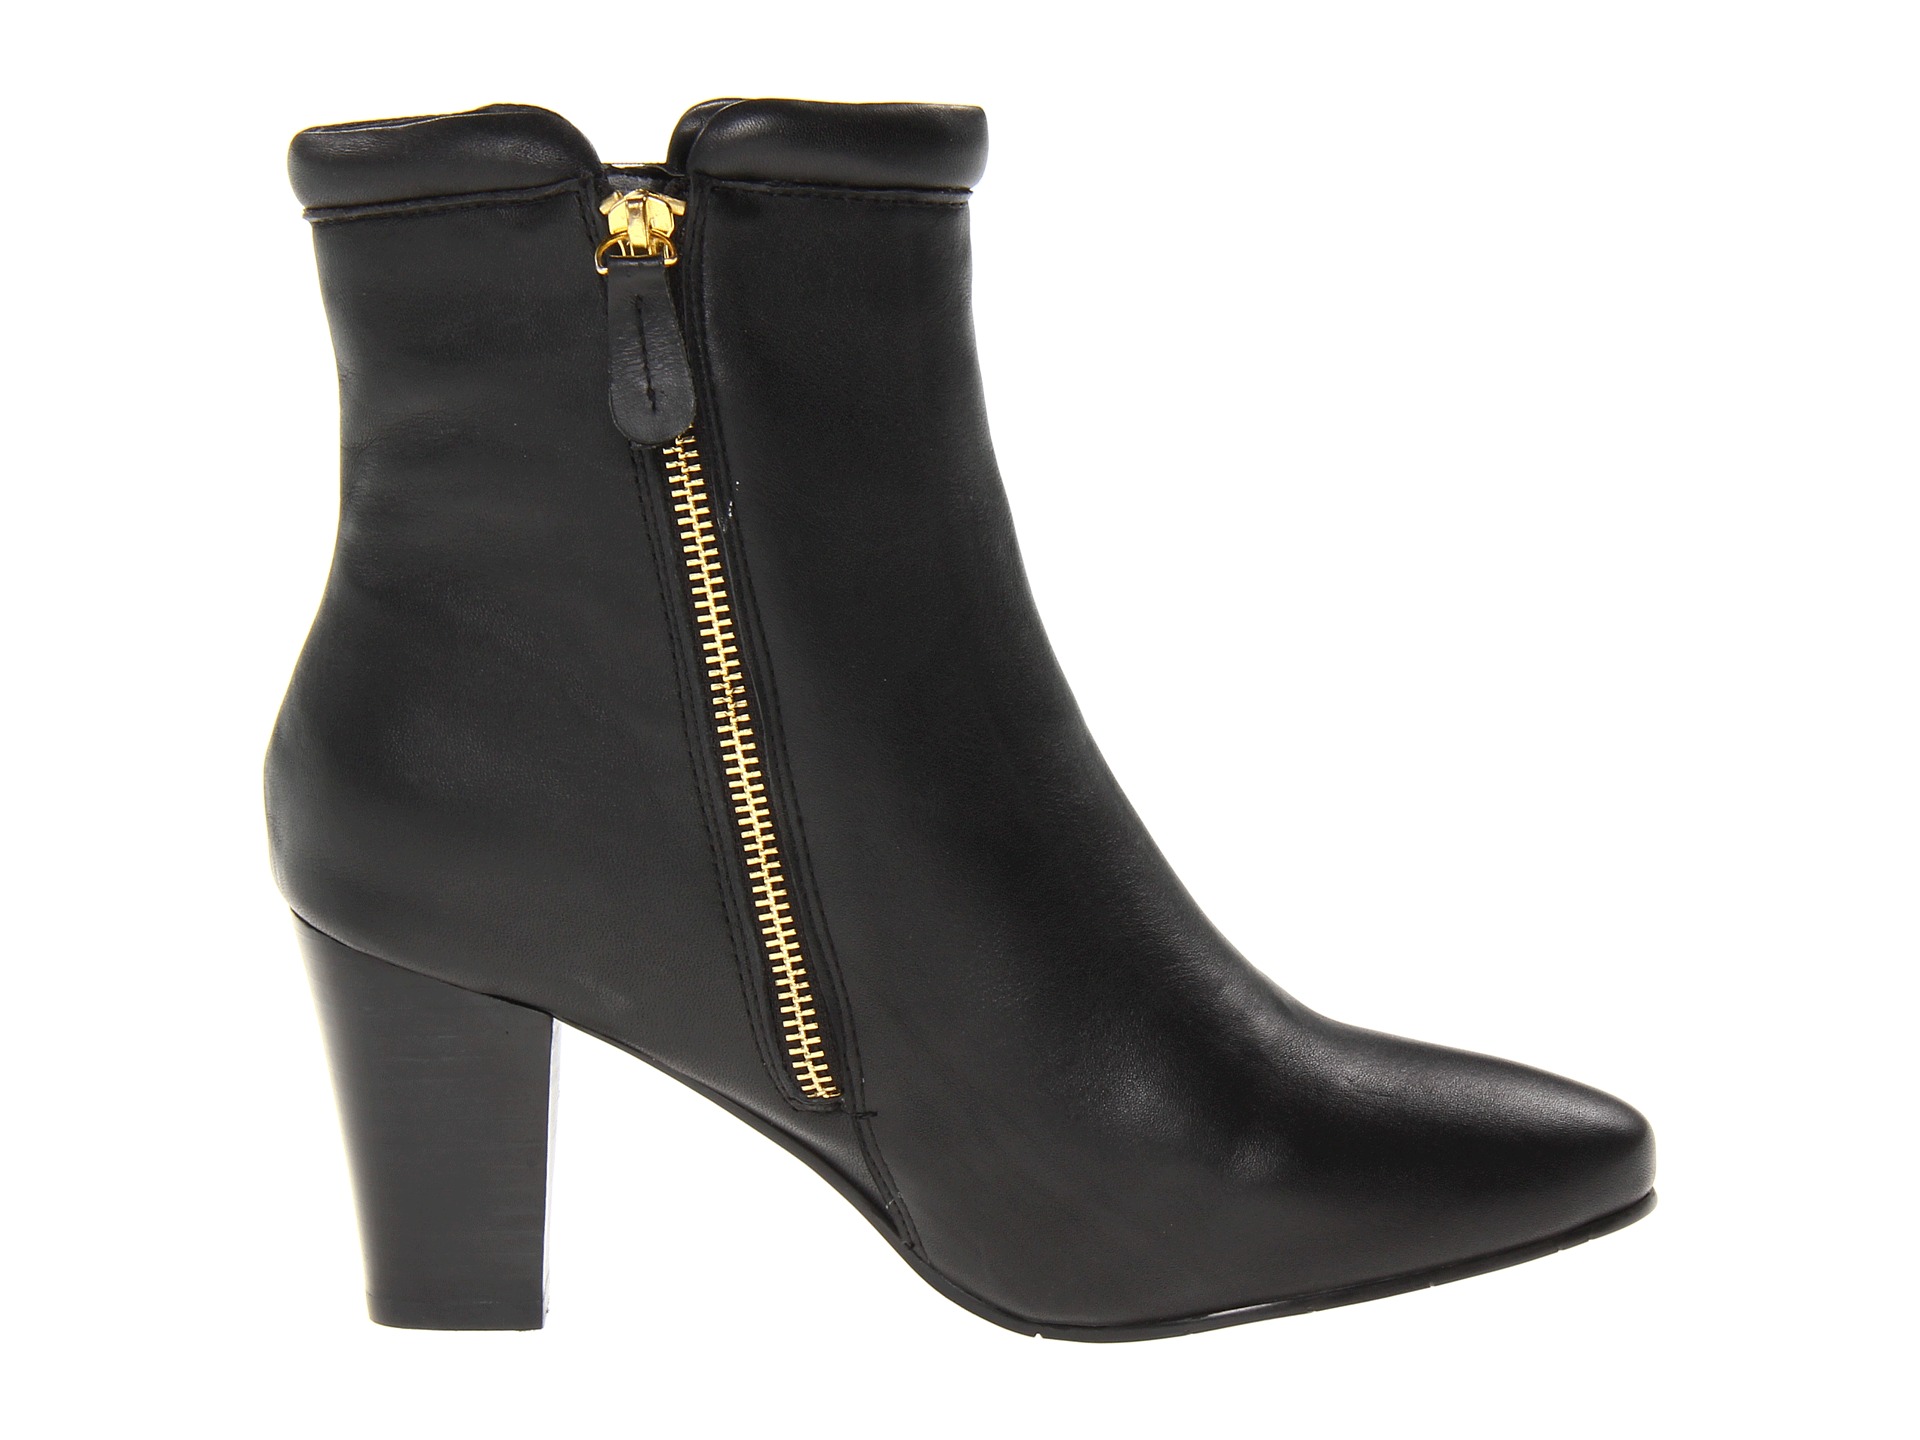 Fitzwell Brit Ankle Boot, Shoes | Shipped Free at Zappos